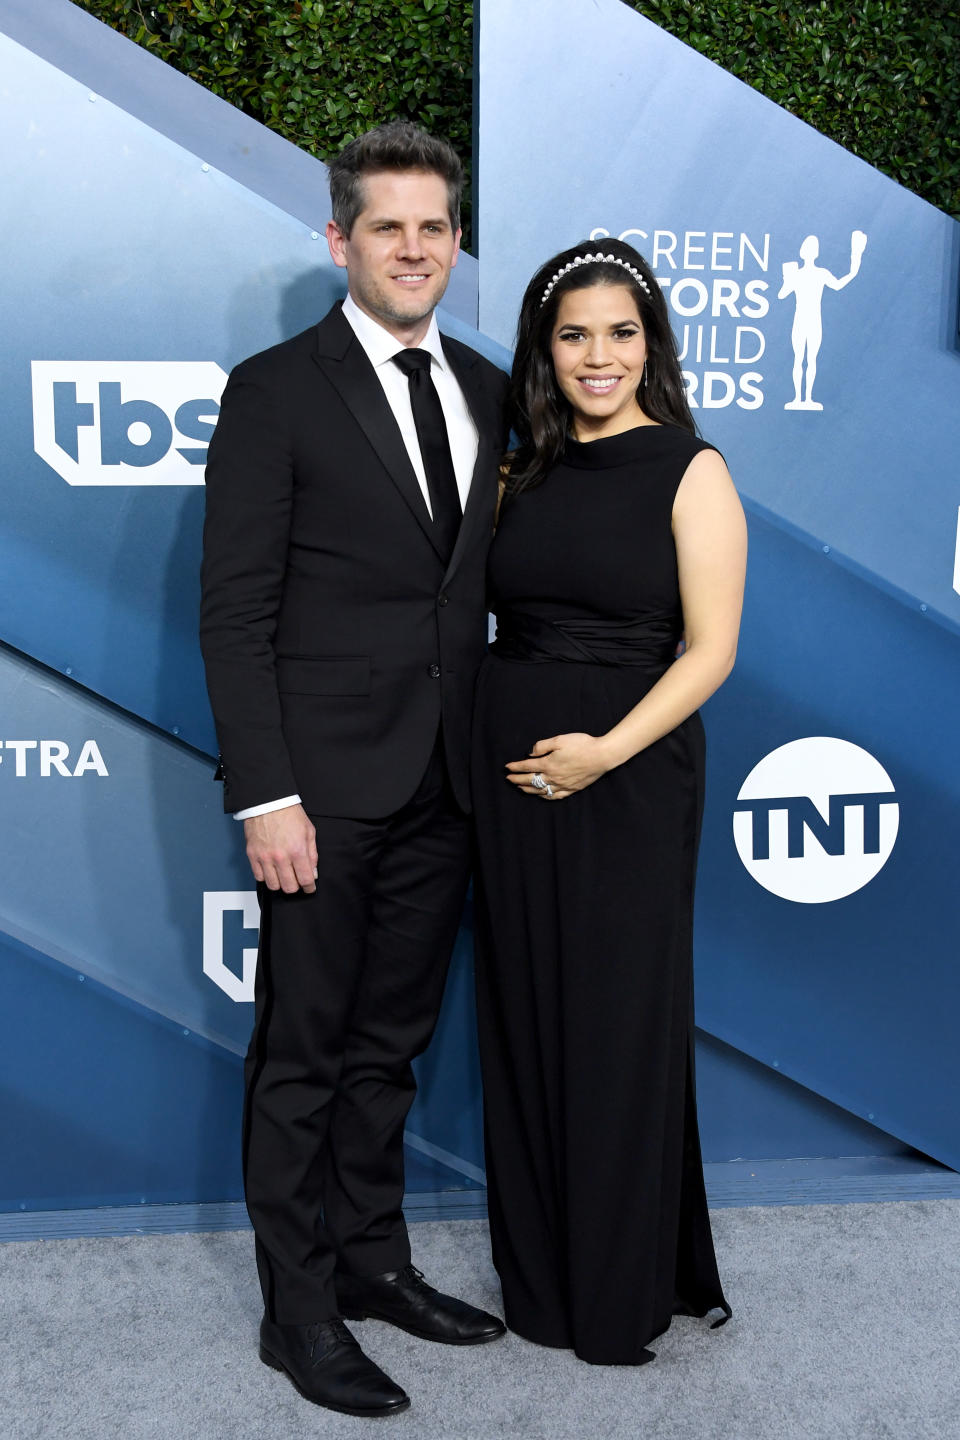 LOS ANGELES, CALIFORNIA - JANUARY 19: (L-R) Ryan Piers Williams and America Ferrera attend the 26th Annual Screen Actors Guild Awards at The Shrine Auditorium on January 19, 2020 in Los Angeles, California. (Photo by Jon Kopaloff/Getty Images)